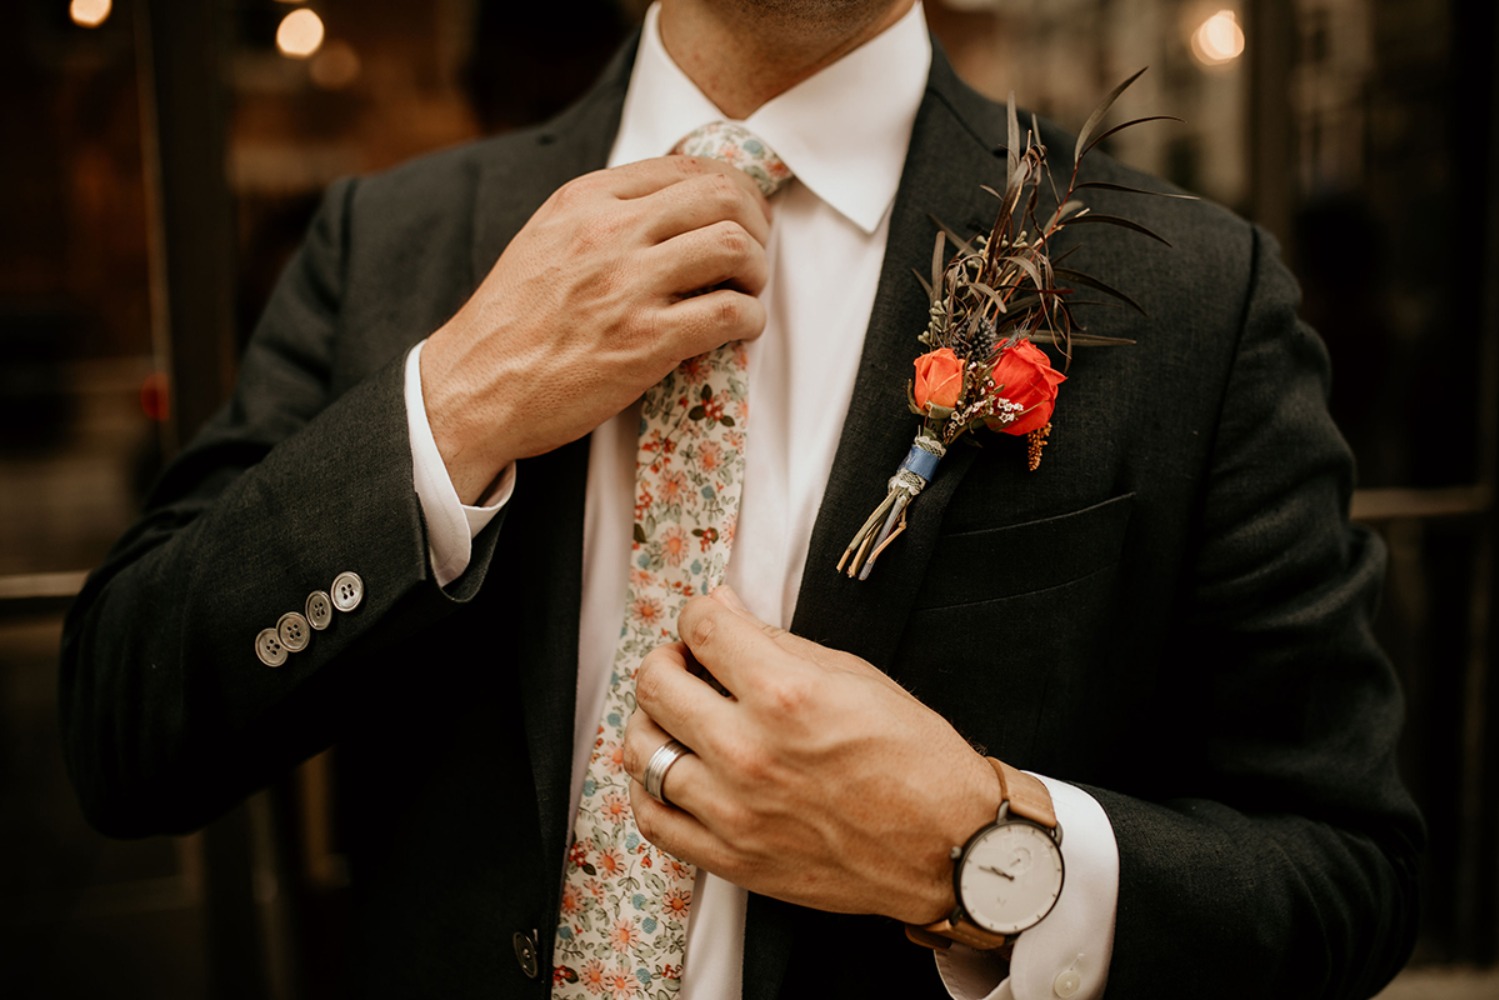 floral patterned tie for the groom